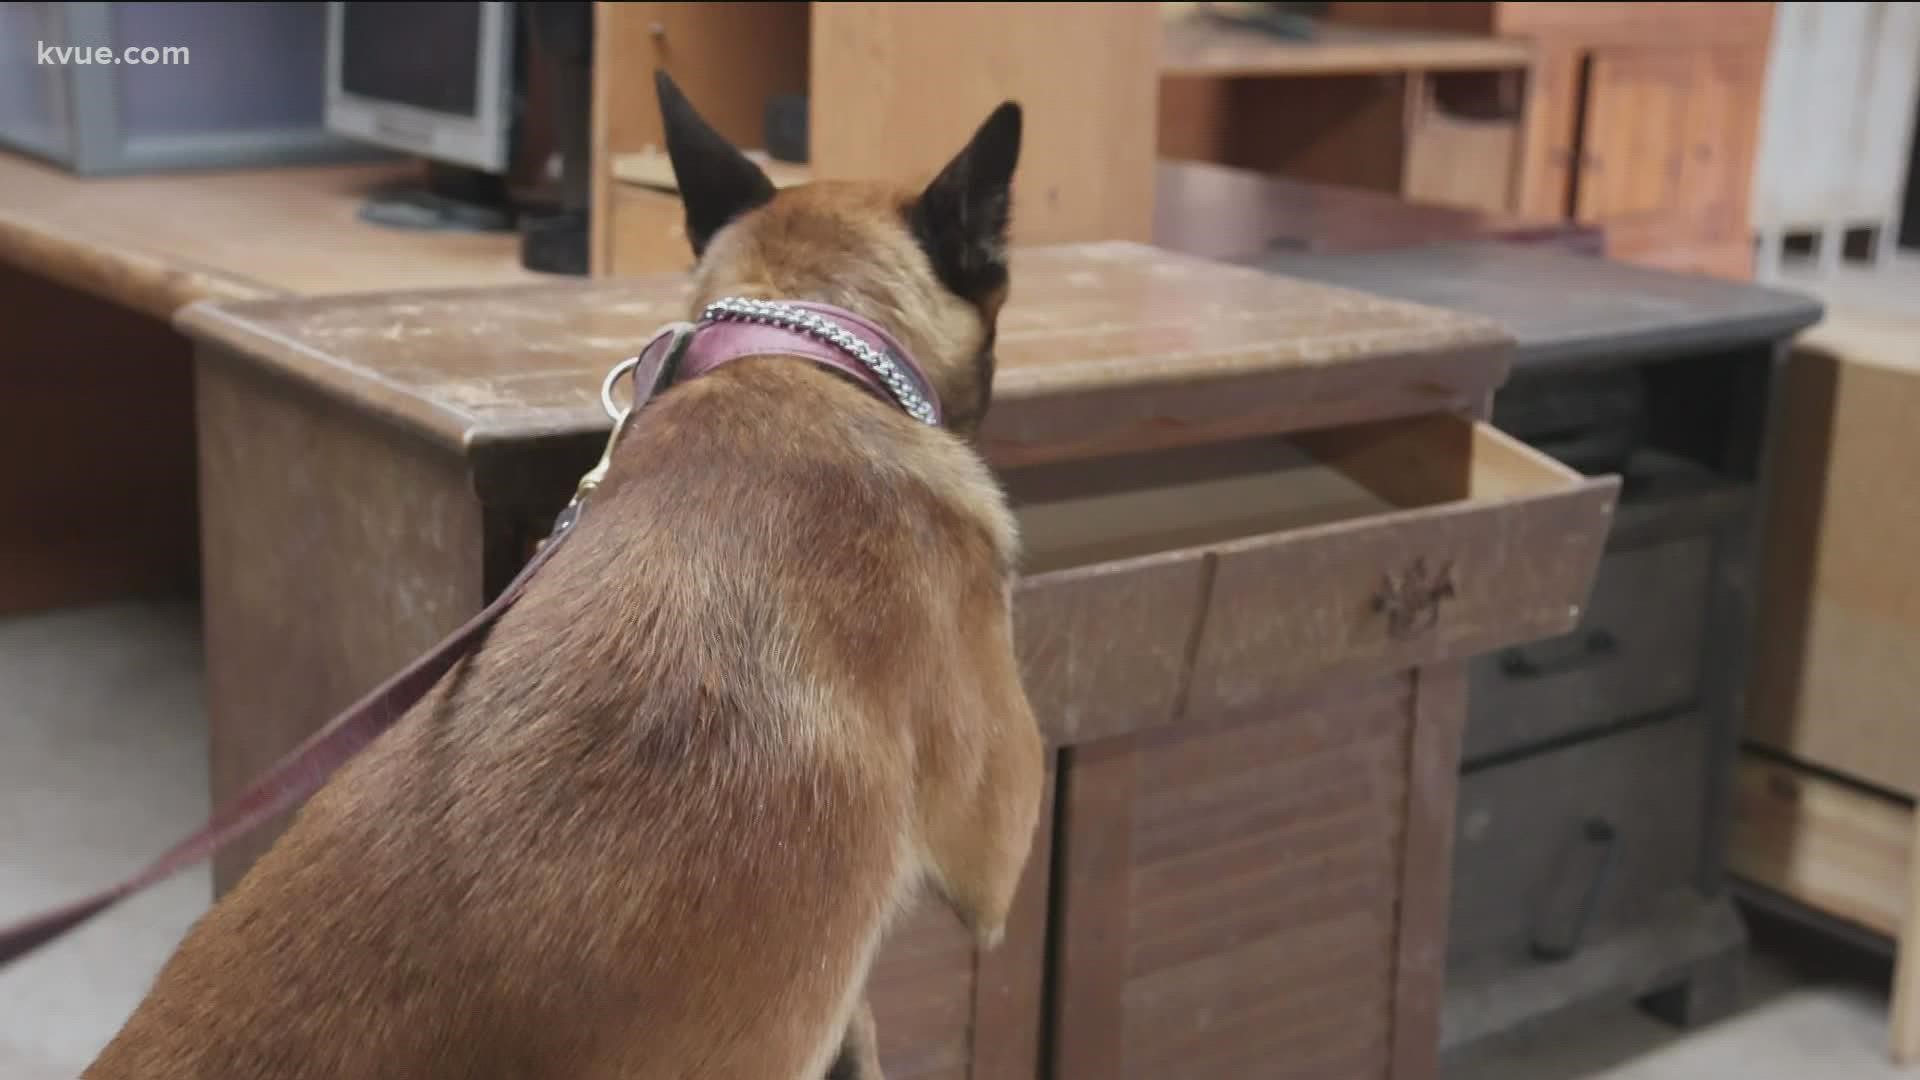 Training a police dog to track down drugs and explosives takes months and thousands of dollars.